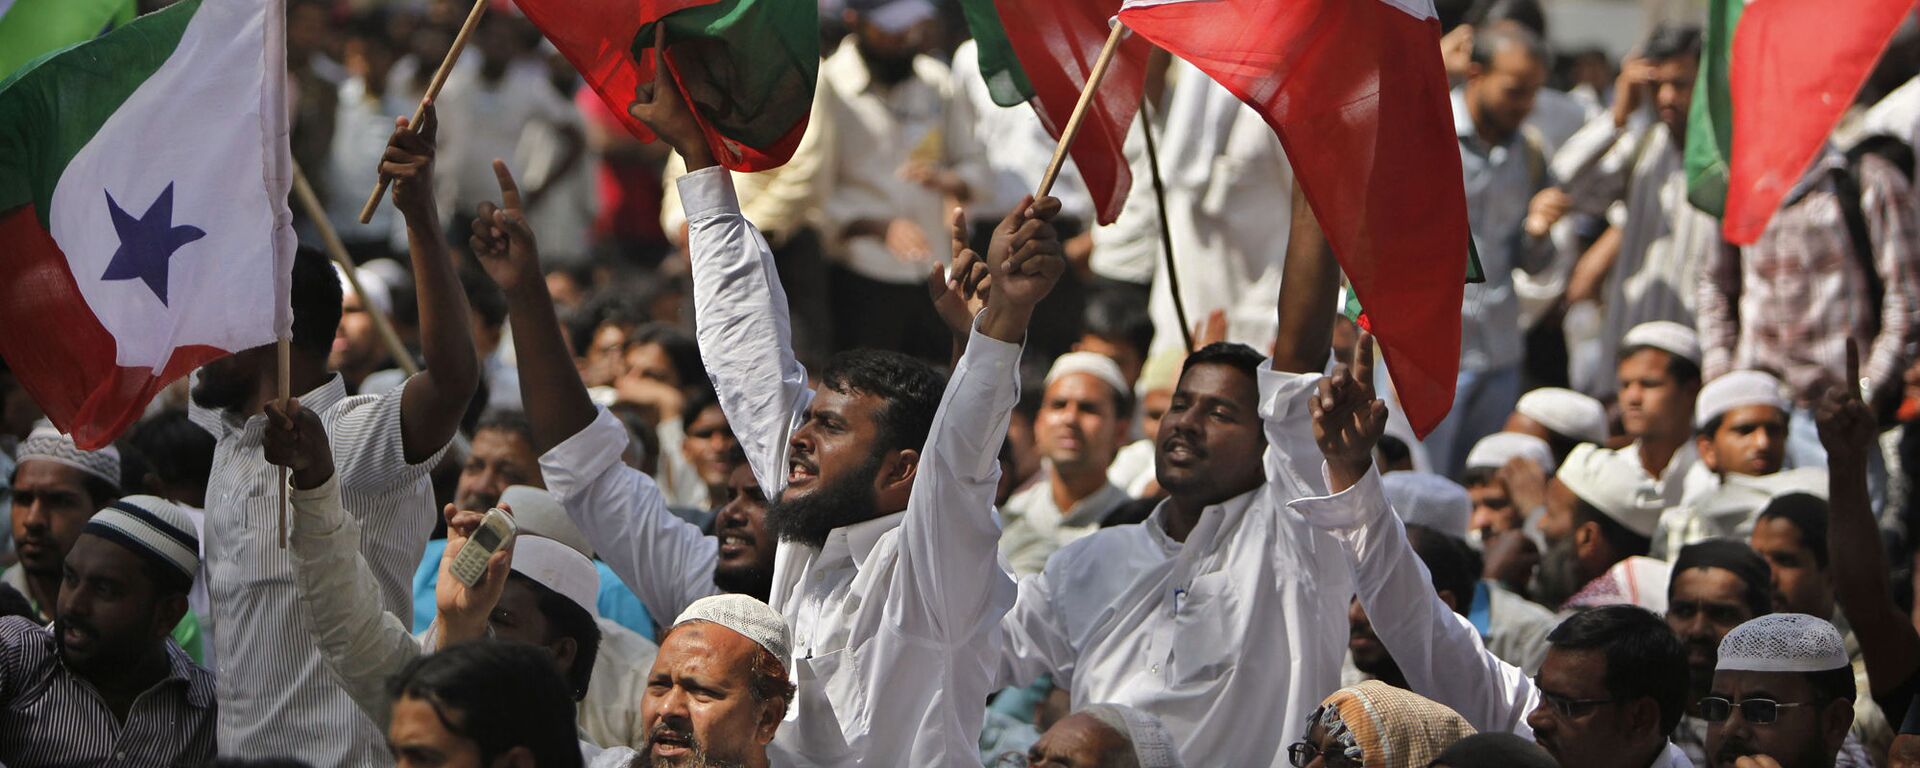 Indian Muslims from the Popular Front of India shout slogans to demand for affirmative action for Muslims in government jobs and in education, in New Delhi, India, Monday, March 15, 2010 - Sputnik India, 1920, 29.12.2022